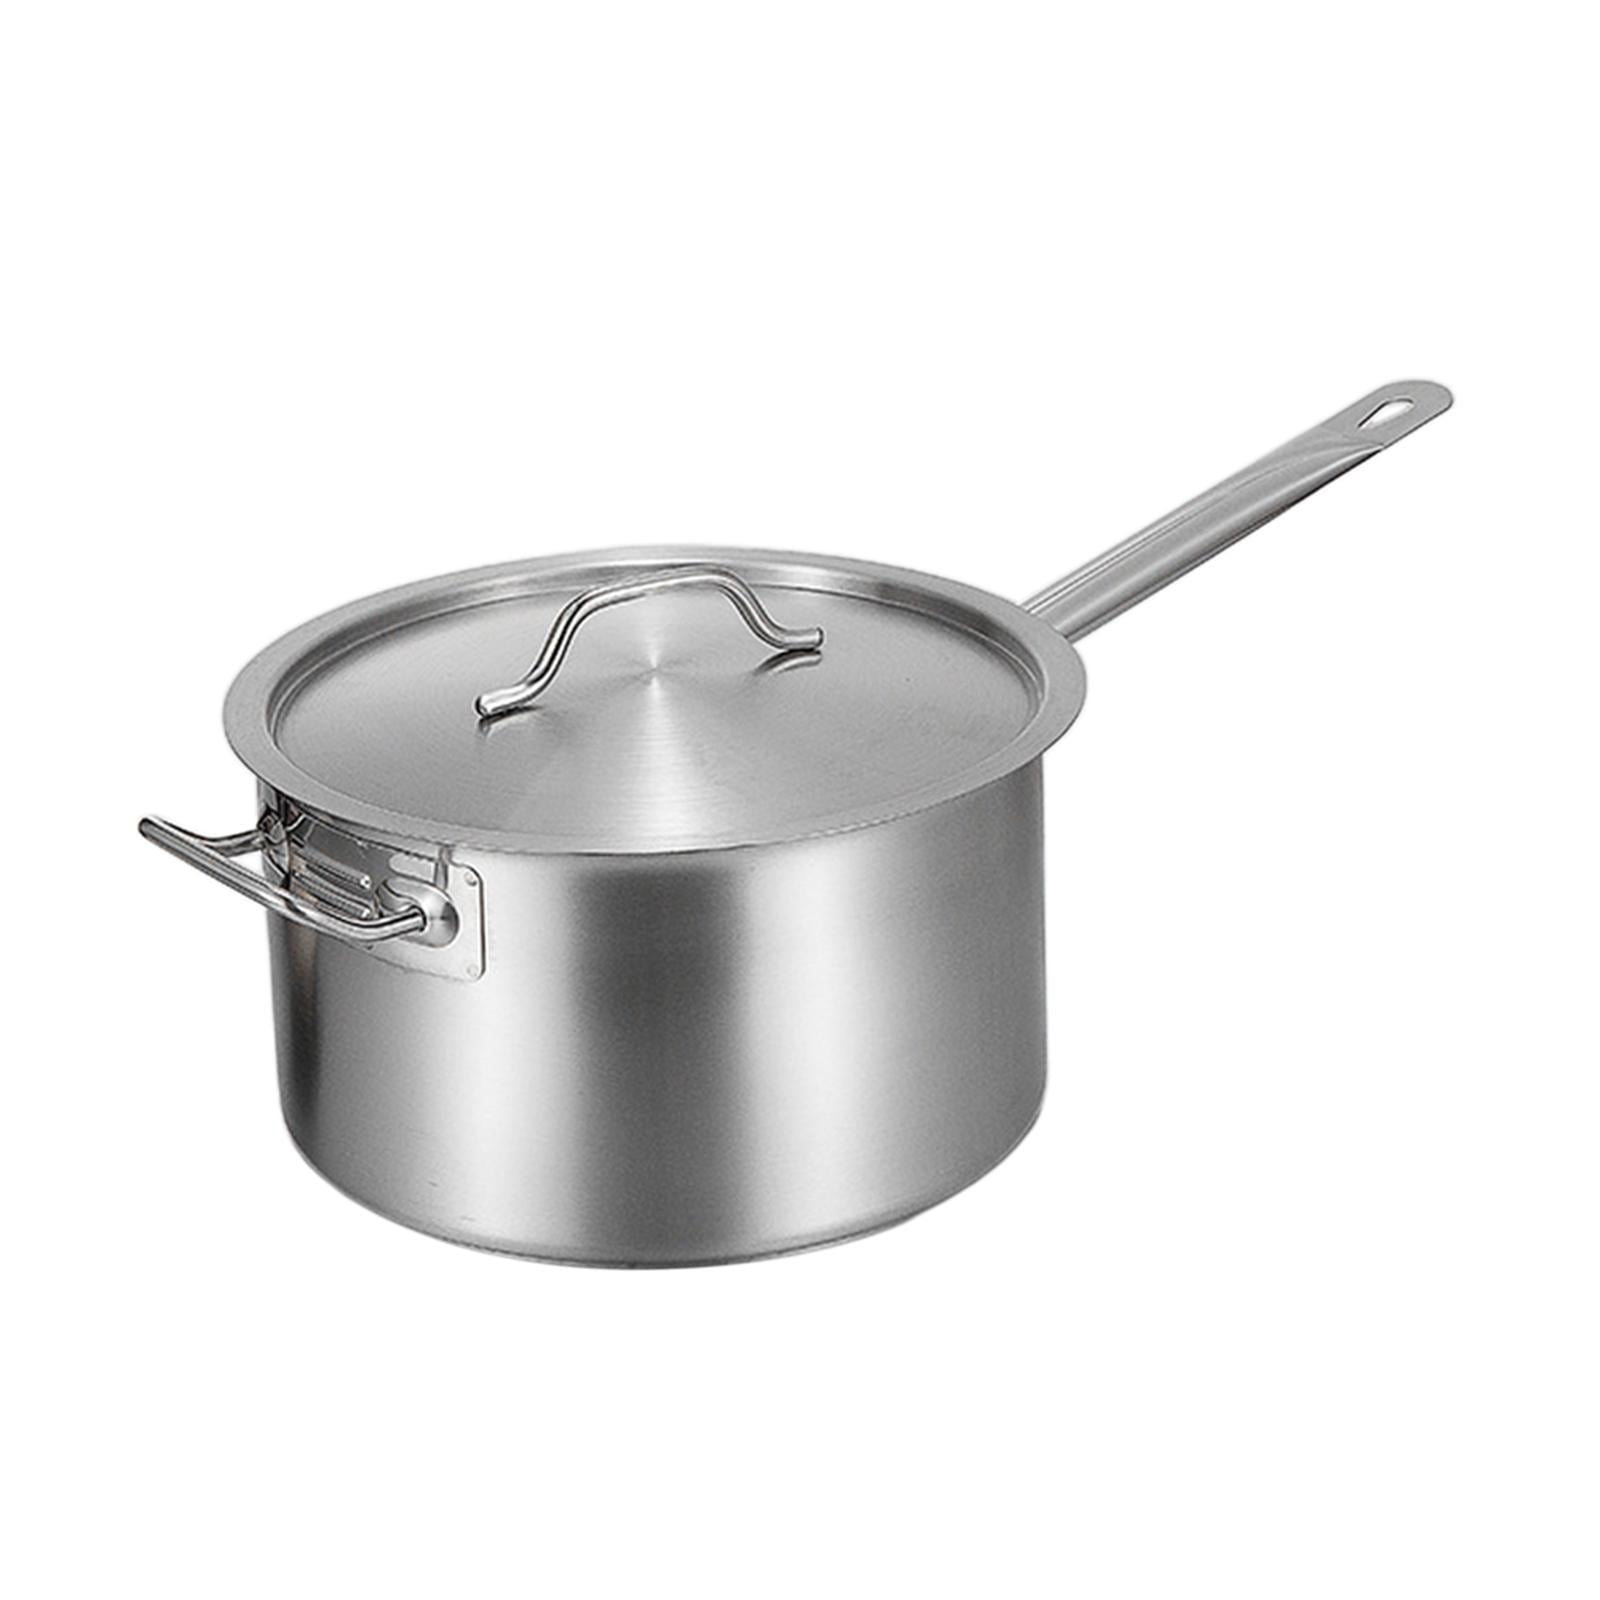 MARSKITOP Stainless Steel Saucepan 1.5 Quart, Small Sauce Pan with Lid,  Induction Sauce Pot Multipurpose Cooking Pot with Stay-Cool Handle,  Dishwasher